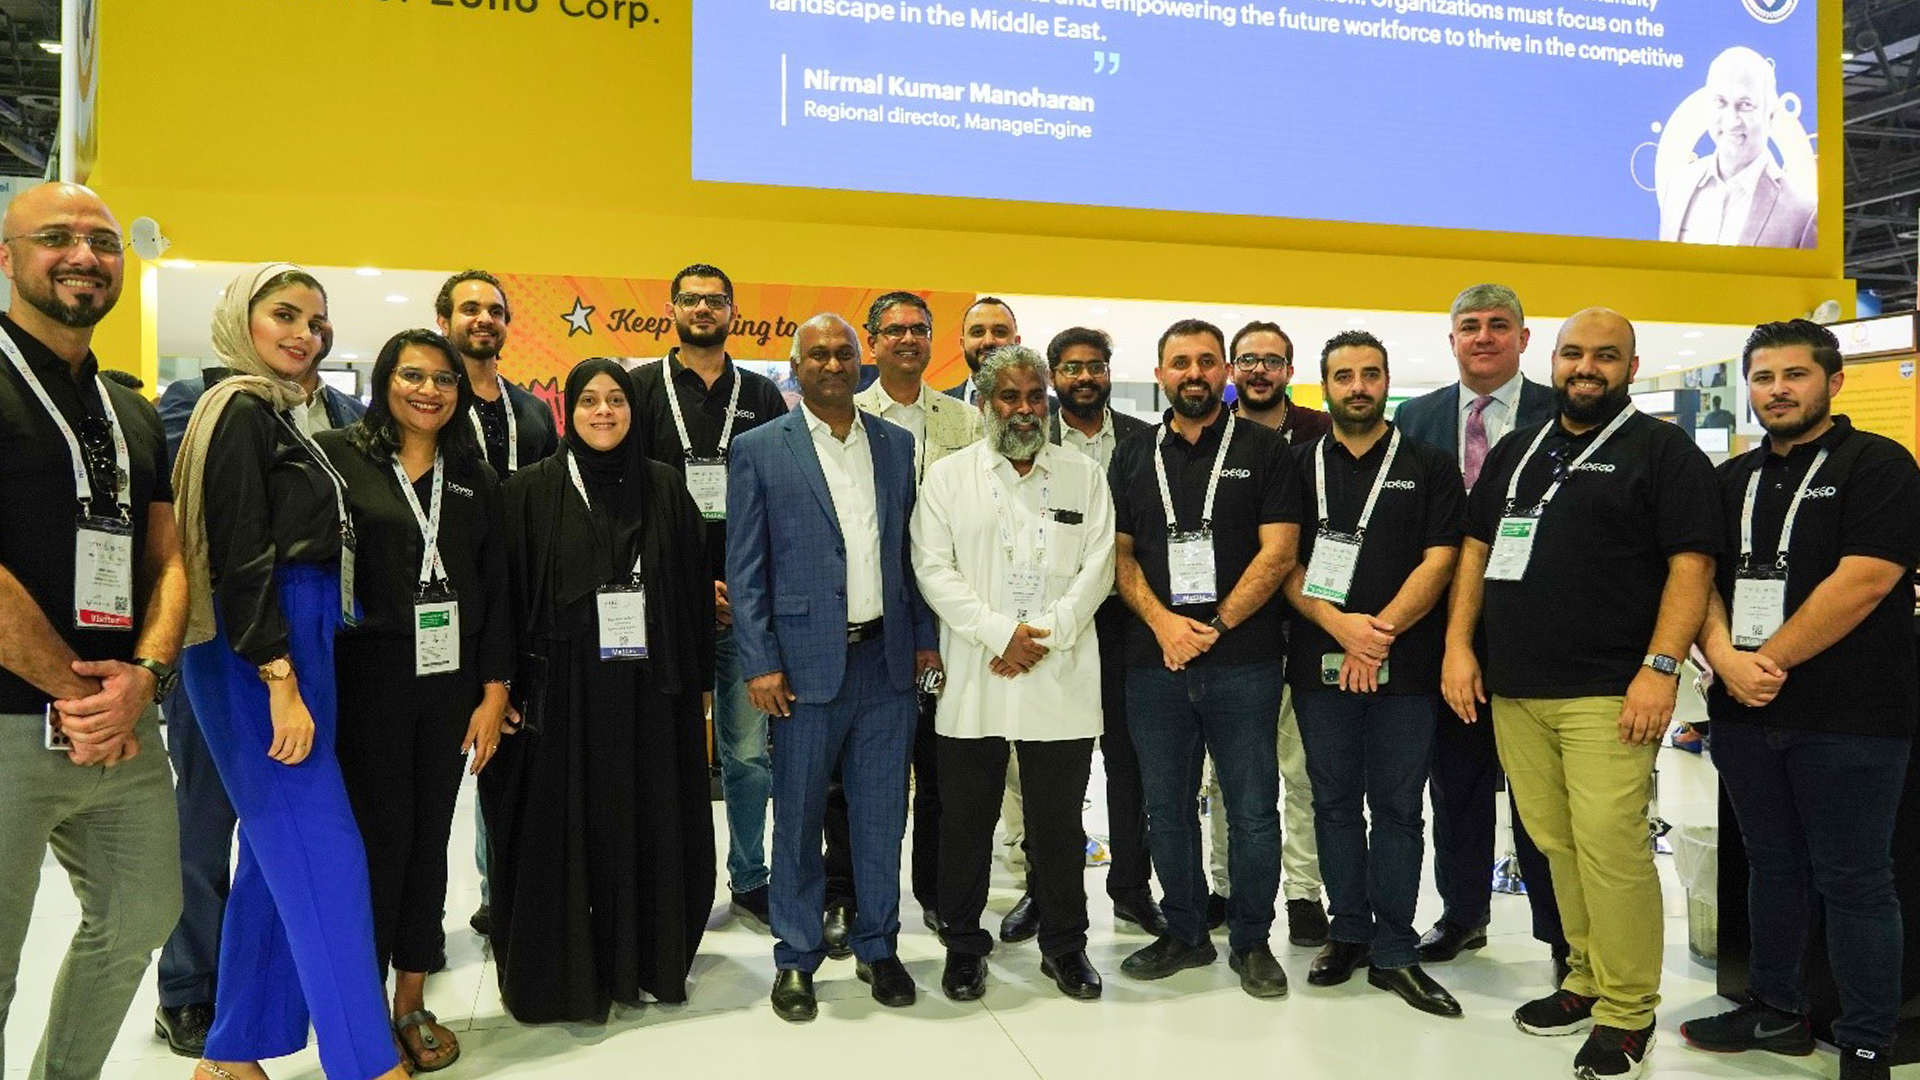 TjDeeD Celebrates 10 Years Working with ManageEngine, at GITEX 2022